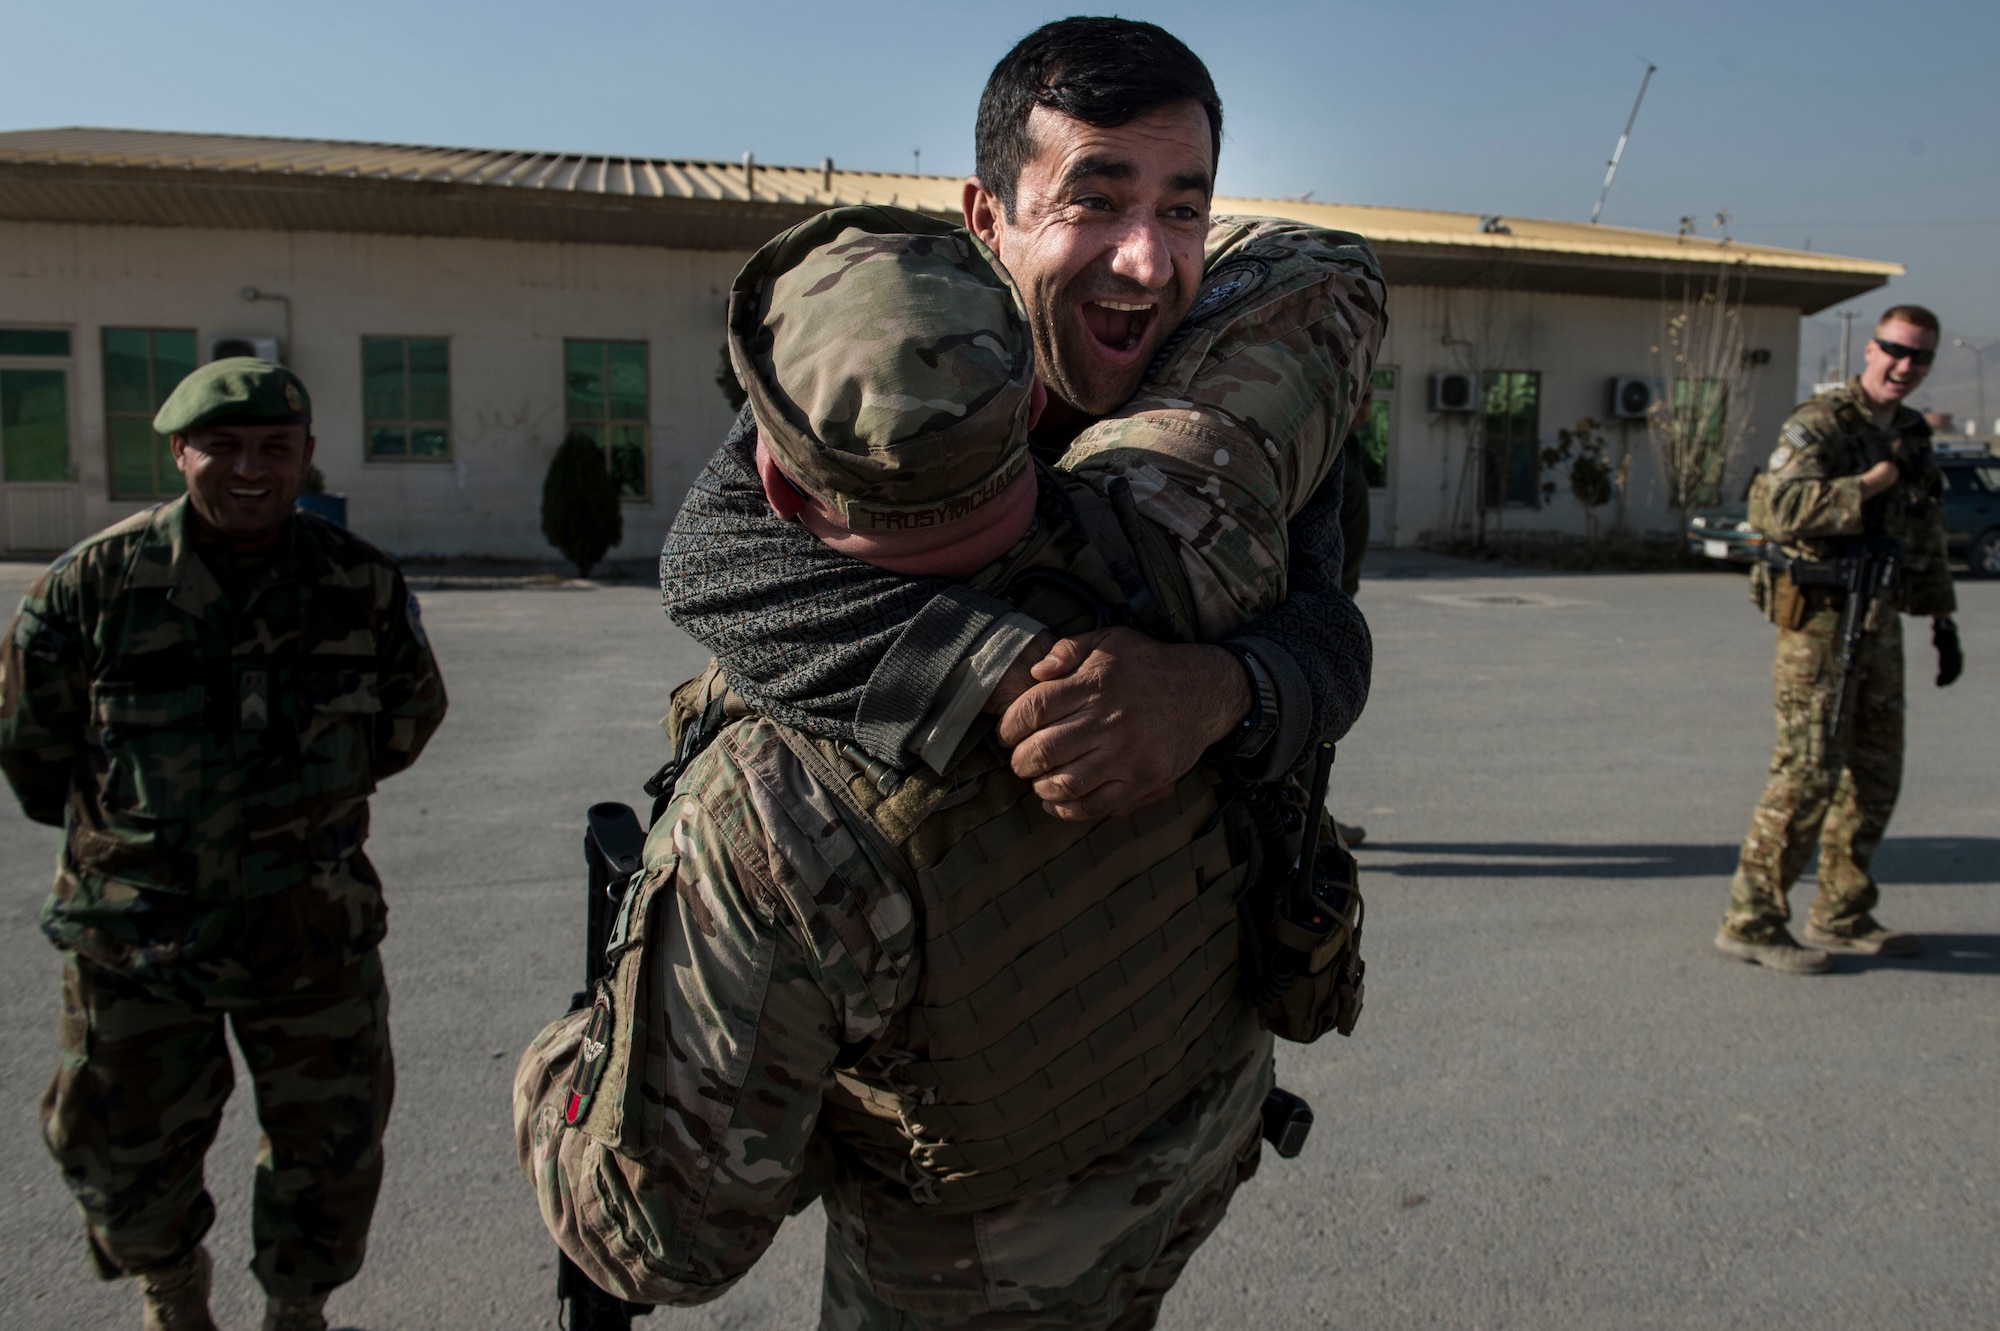 An Afghan Air Force soldier jumps into the arms of U.S Air Force Master Sgt. Daniel Prosymchak near Forward Operating Base Oqab, Kabul, Afghanistan, Dec. 13, 2015. Prosymchak is assigned to the Train, Advise, Assist Command-Air (TAAC-Air) security forces and is deployed from Charleston Air Force Base, S.C. (U.S. Air Force photo by Staff Sgt. Corey Hook/Released)